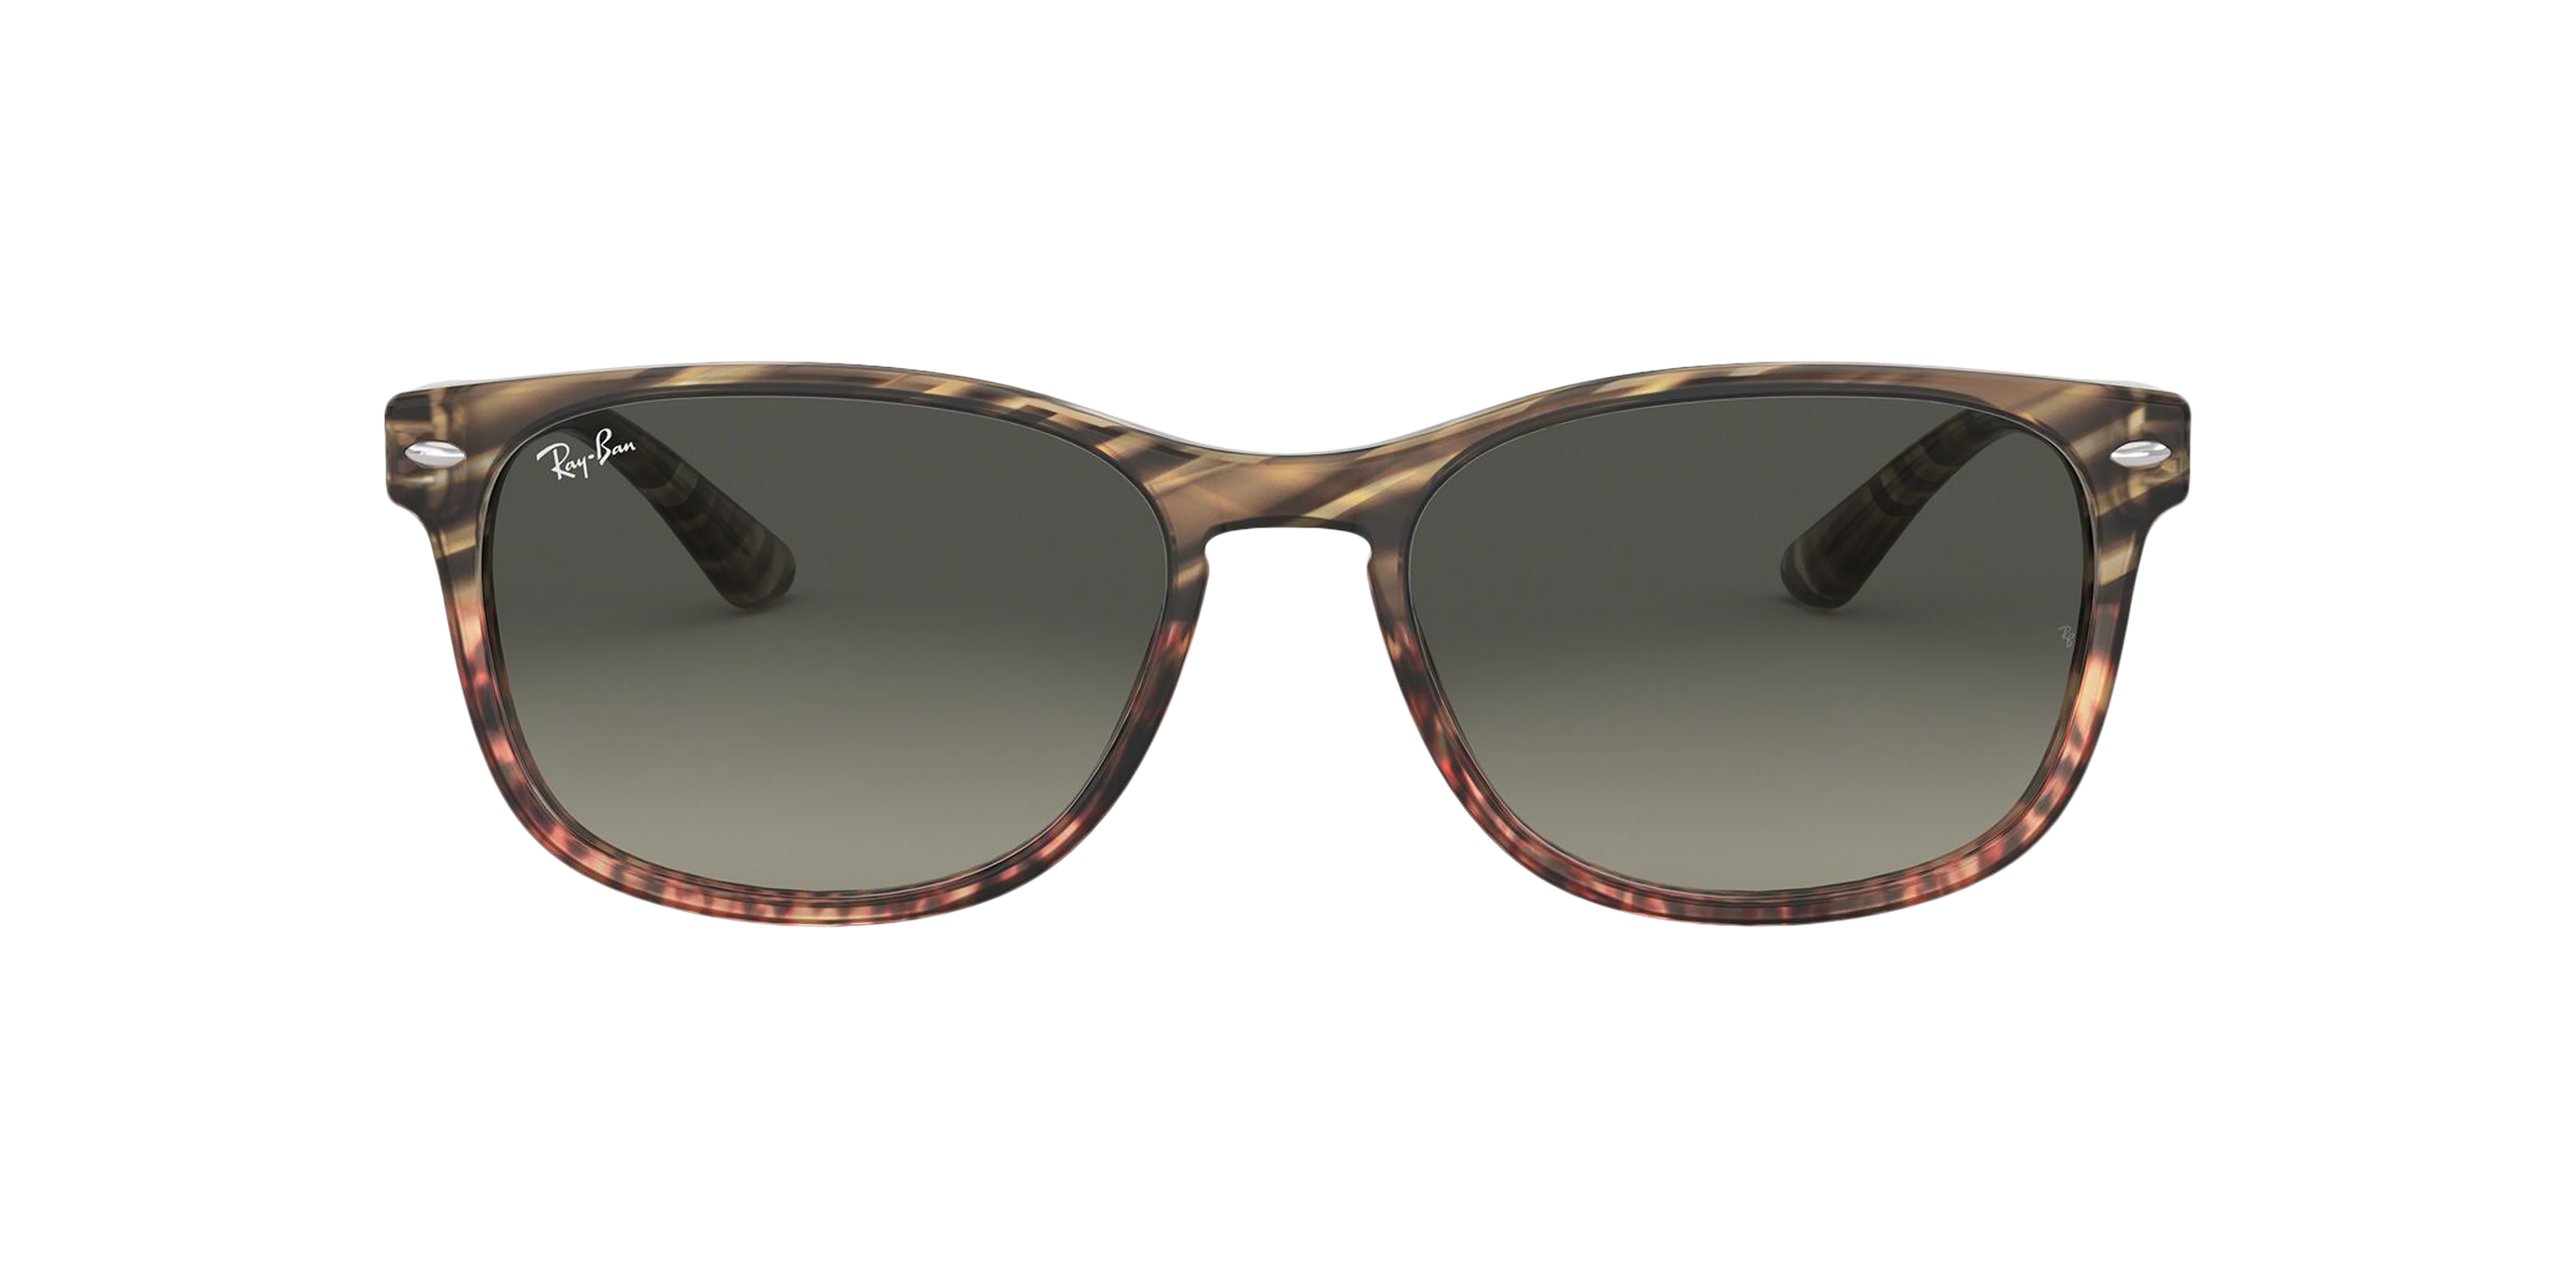 [products.image.front] Ray-Ban RB2184 125471